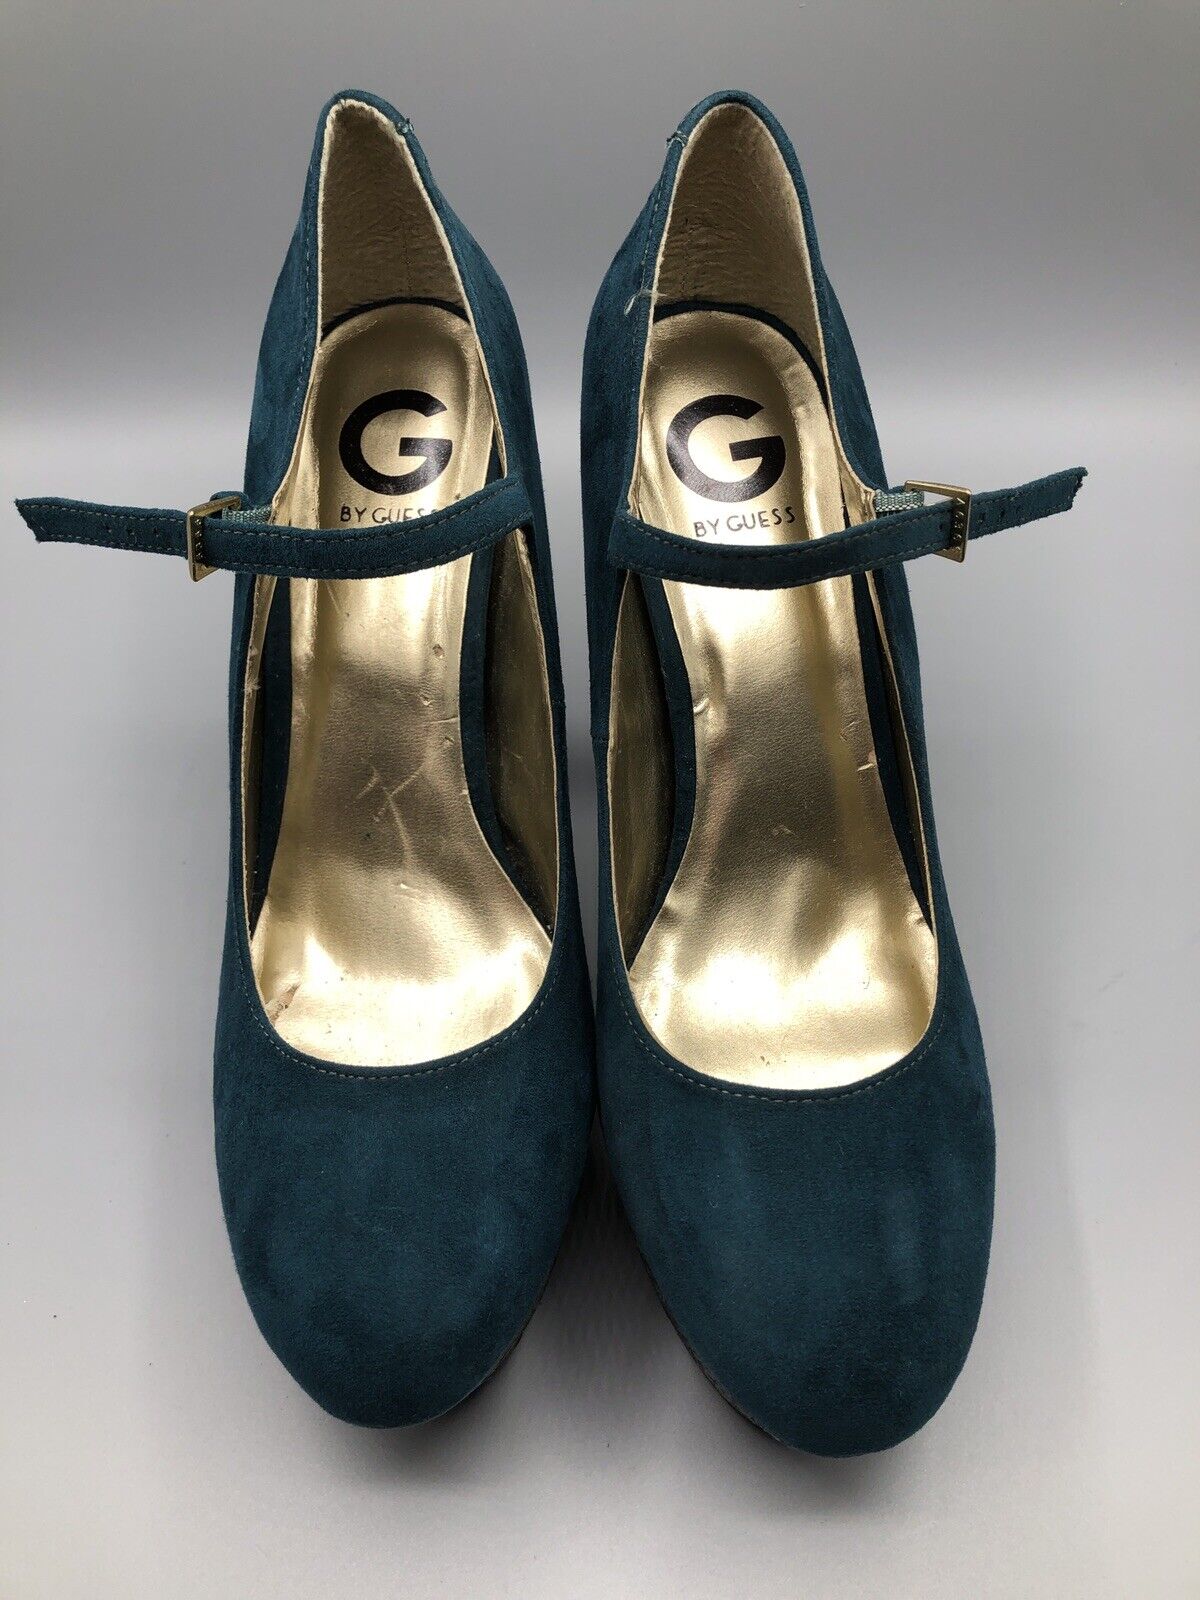 G By Guess Platform Stiletto Heels Hunter Green Patent Leather S